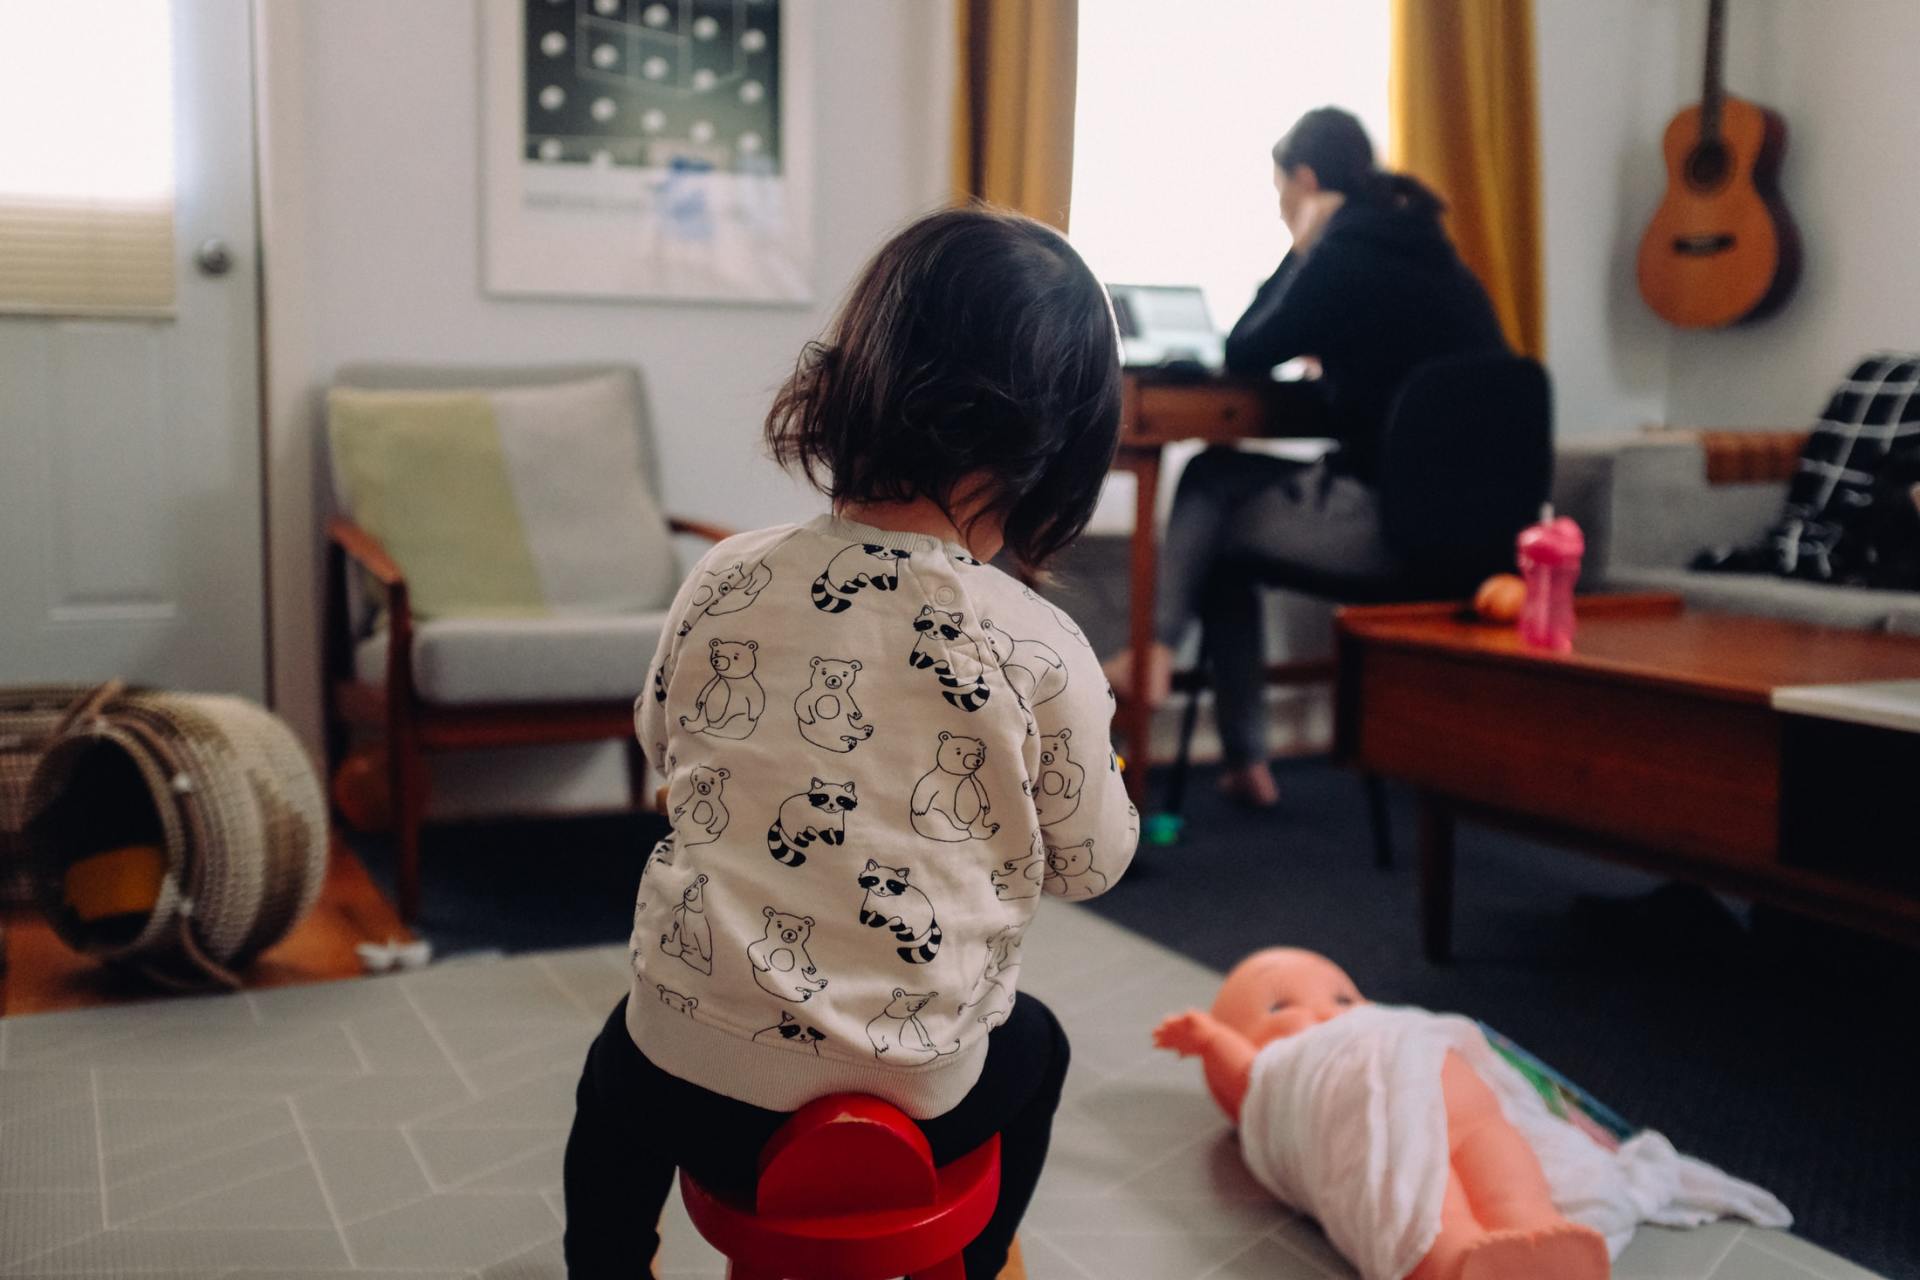 Mother working from home while daughter plays behind her